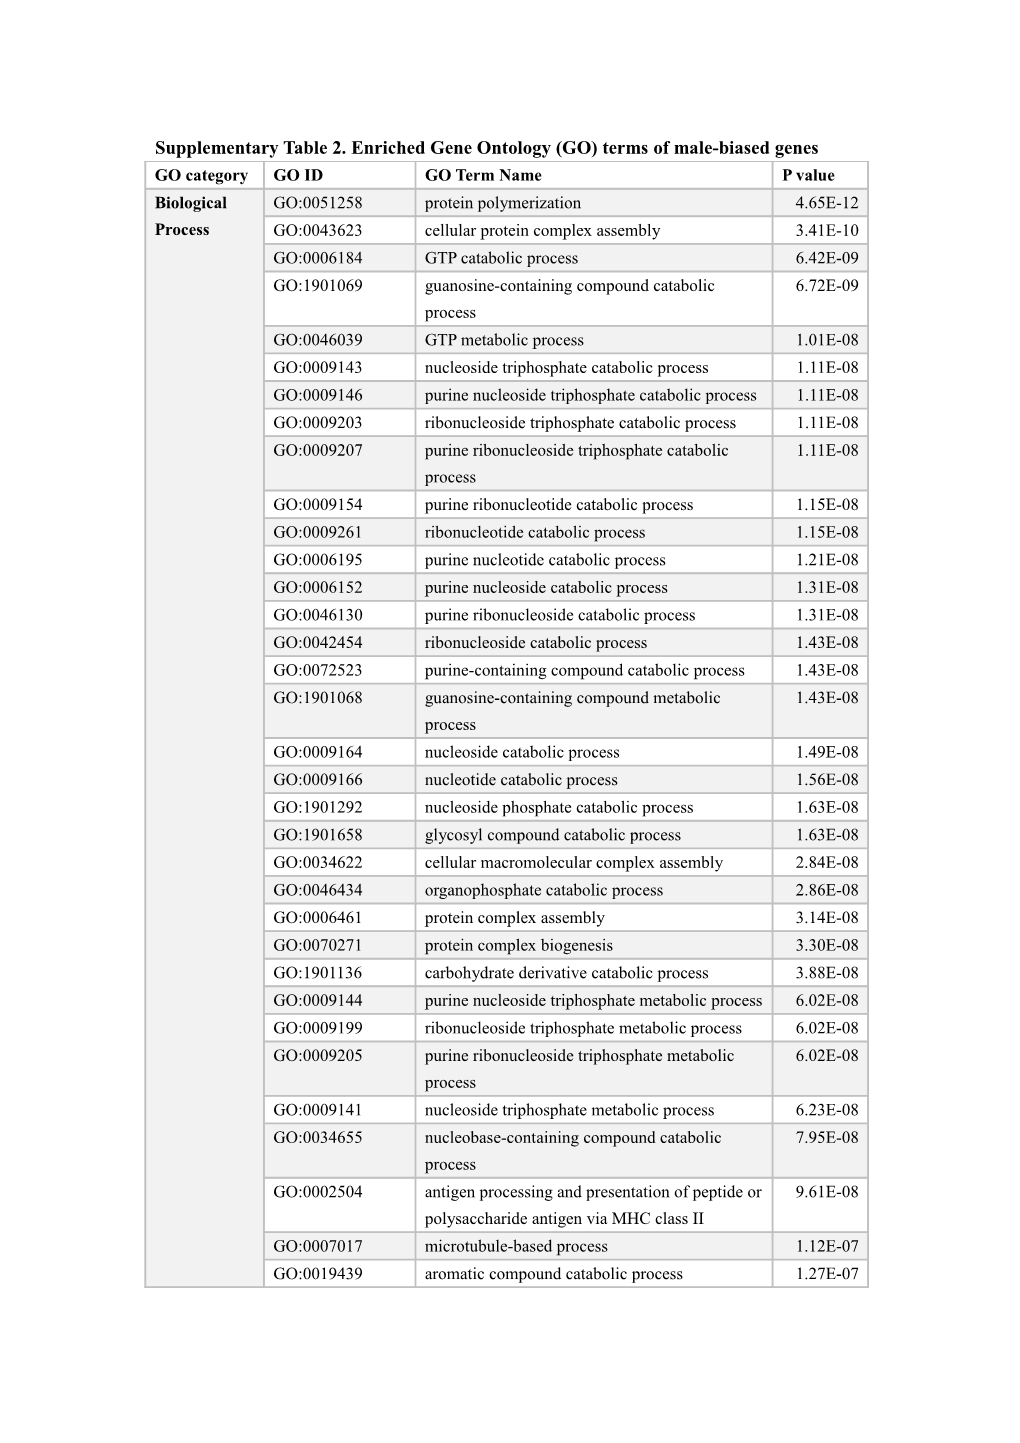 Supplementary Table 2. Enriched Gene Ontology (GO) Terms of Male-Biased Genes